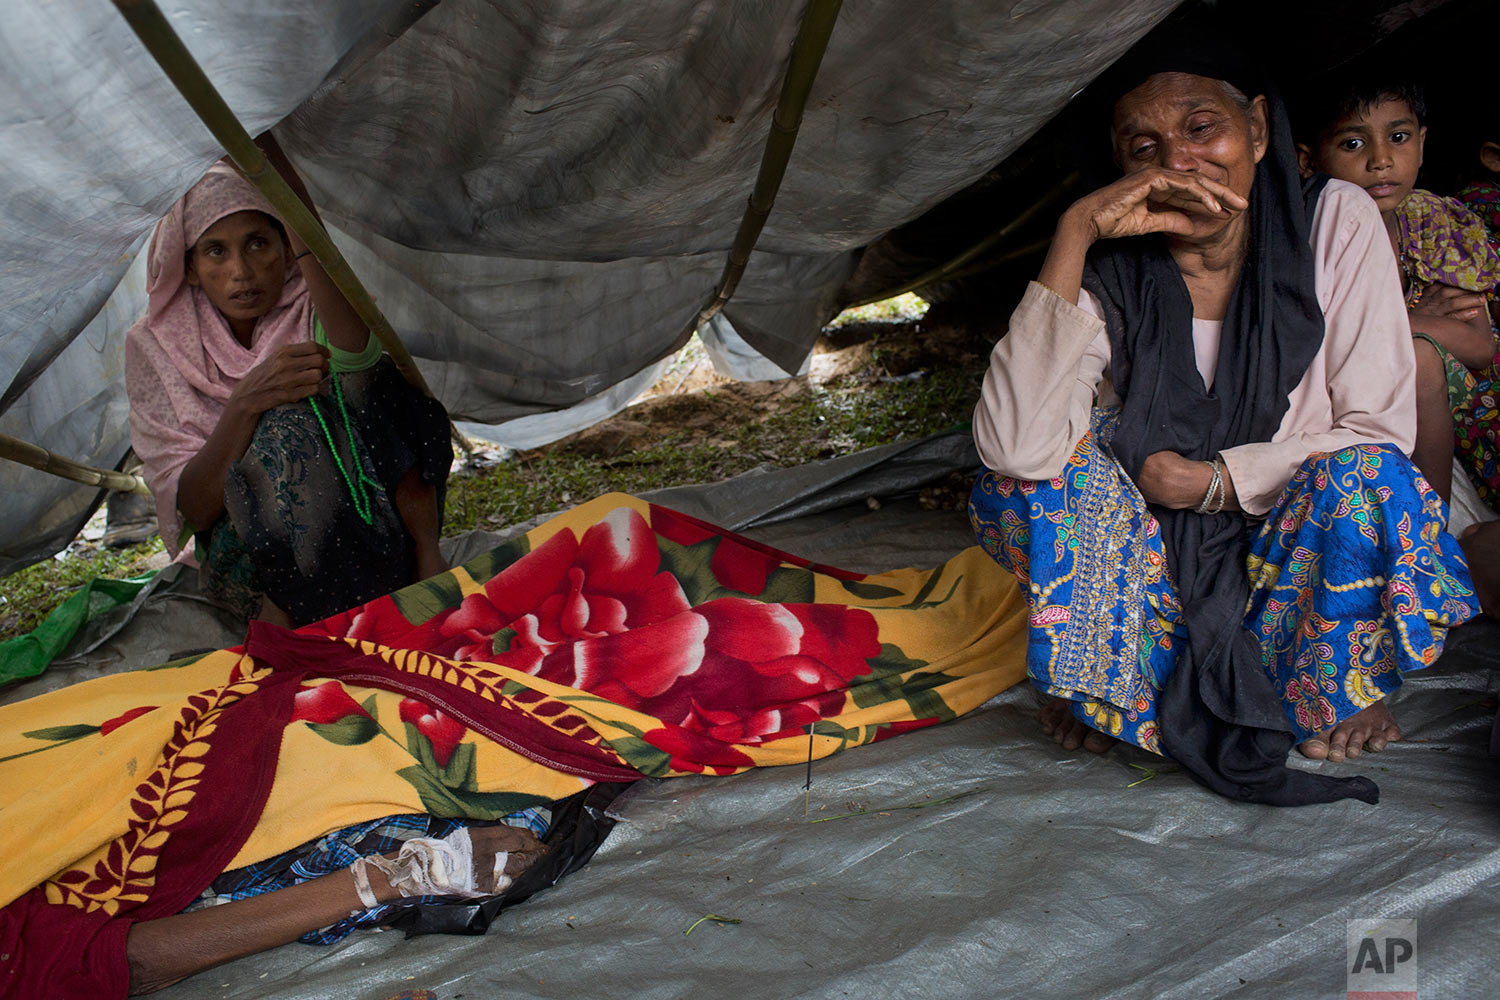 Newly arrived Rohingyas mourn by the body of a family member Ali Akbar, 70, in a makeshift tent in Kutupalong, Bangladesh, Friday, Sept. 8, 2017. According to family members, Akbar was shot in the hand and beaten with rifle butts by Myanmar soldiers before the family escaped to Bangladesh. He died today. (AP Photo/Bernat Armangue)